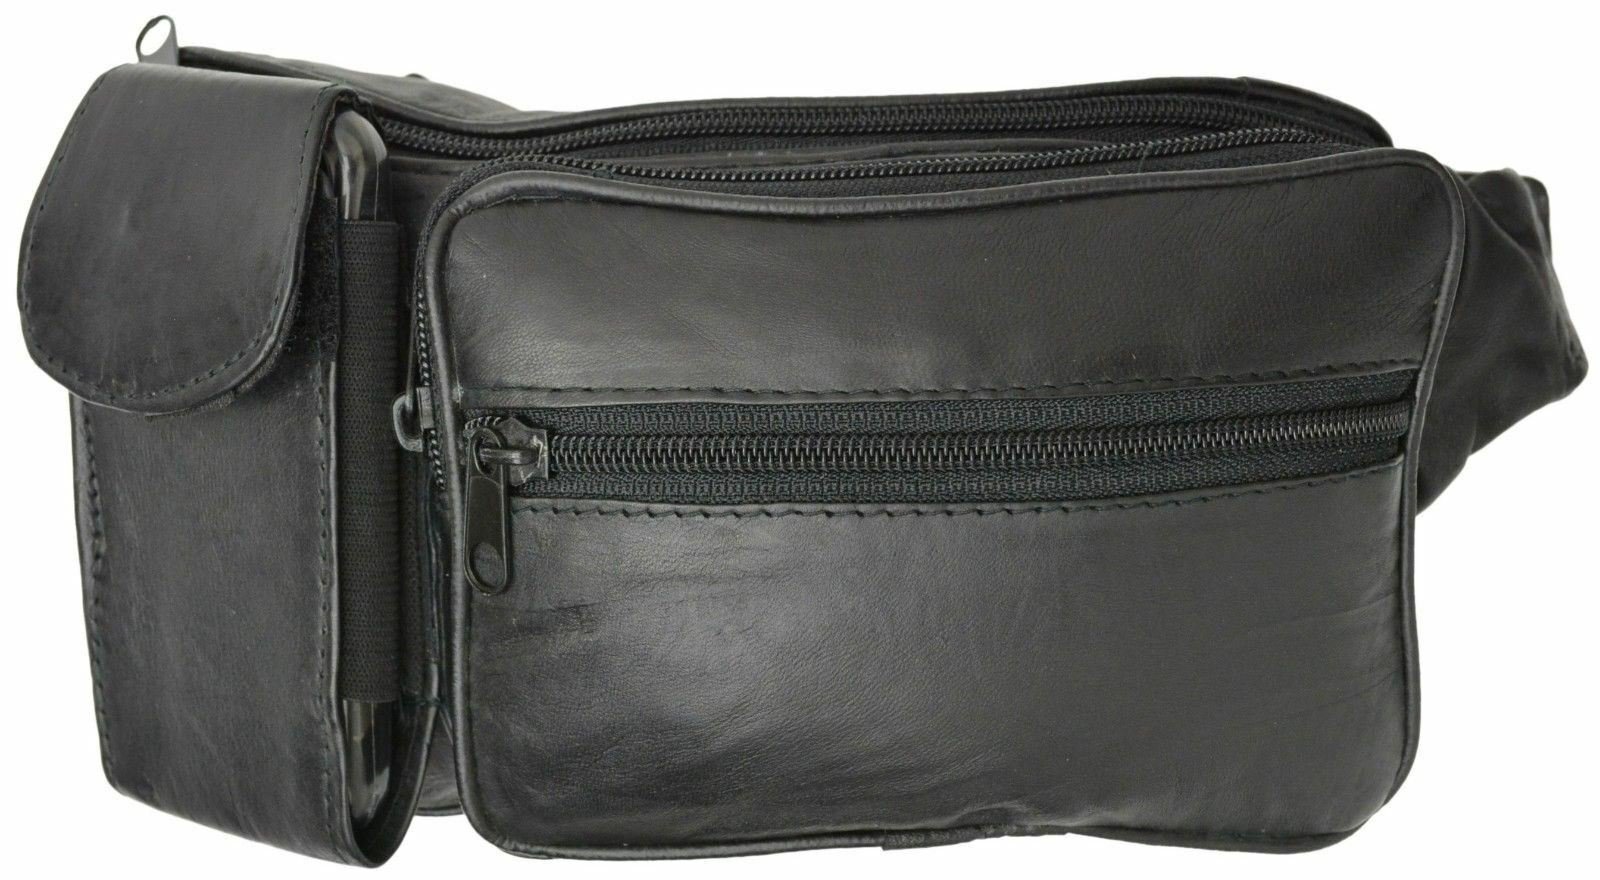 New Black Pure Leather Fanny Pack Waist bag Adjustable Travel Pouch Cell Phone